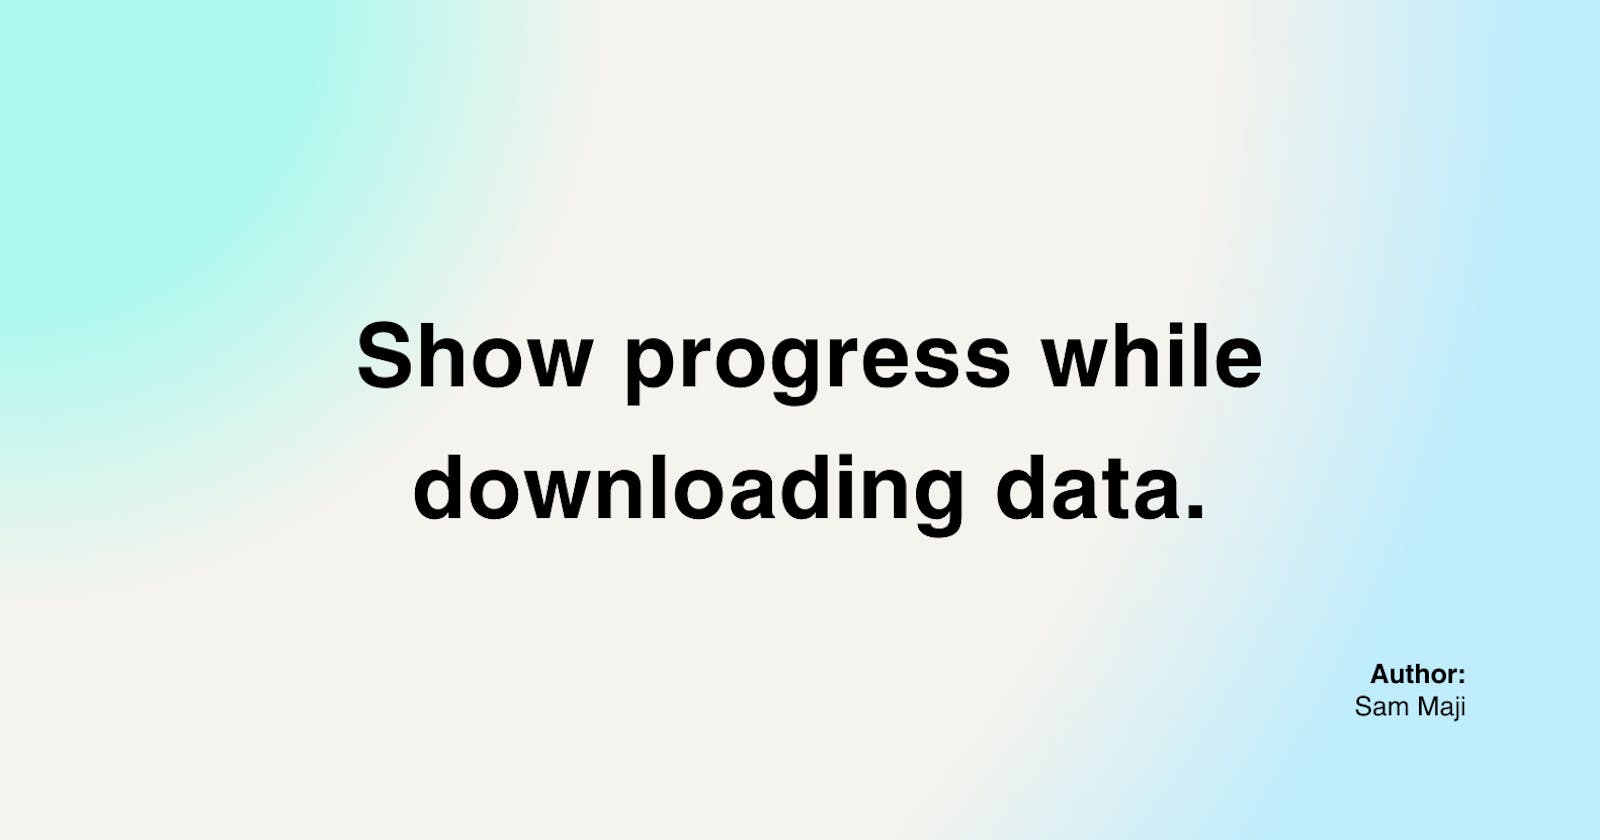 How to show progress while downloading data in node.js